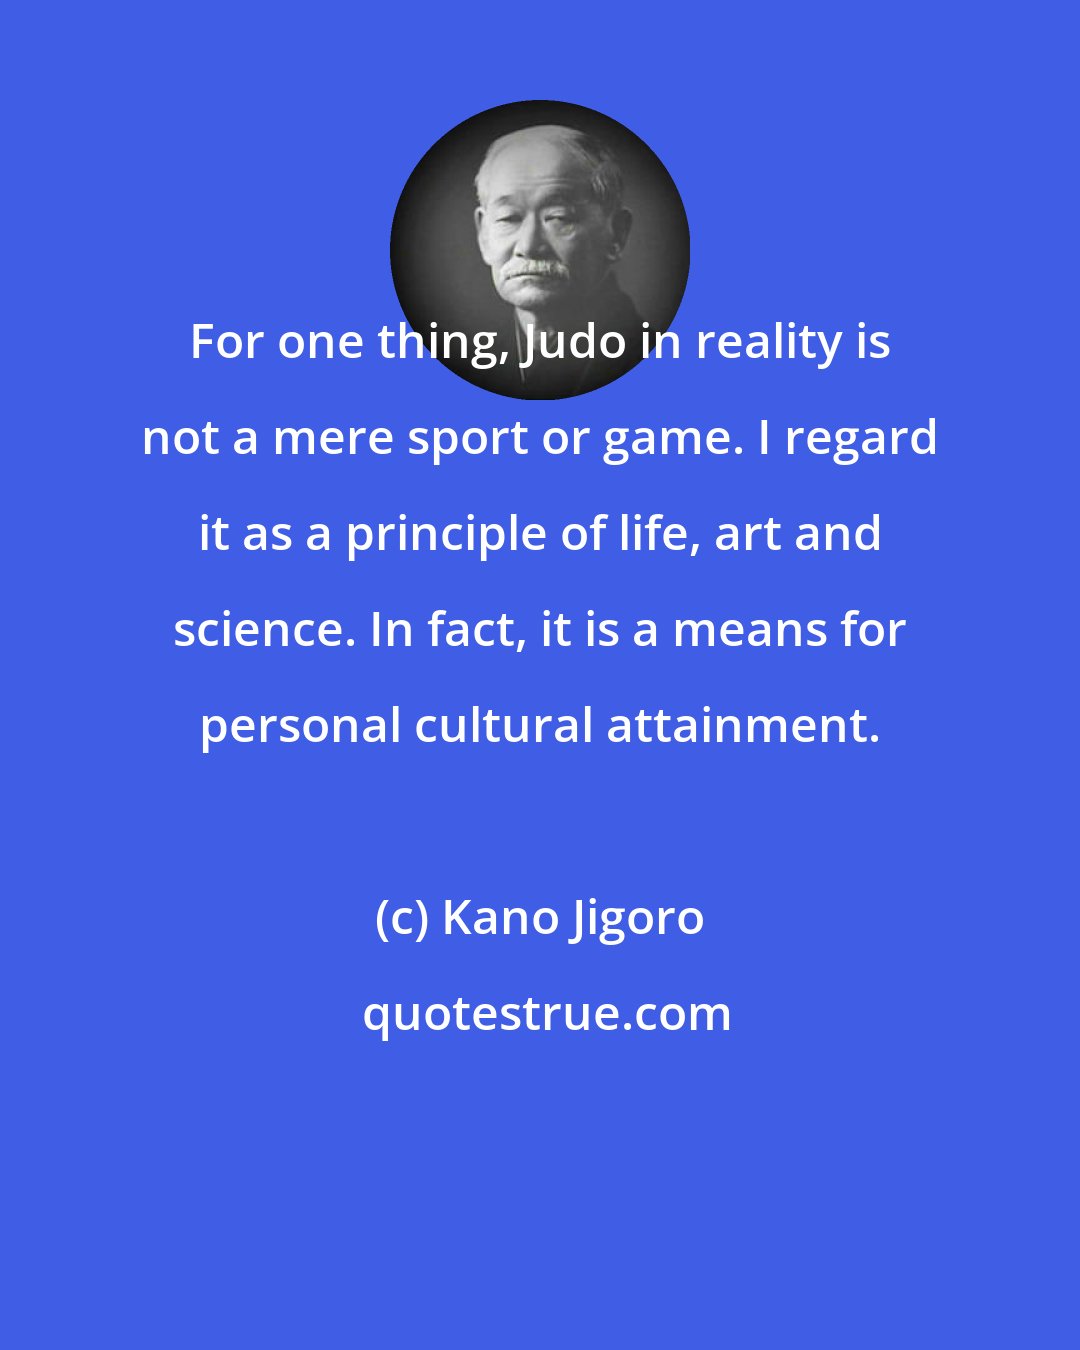 Kano Jigoro: For one thing, Judo in reality is not a mere sport or game. I regard it as a principle of life, art and science. In fact, it is a means for personal cultural attainment.